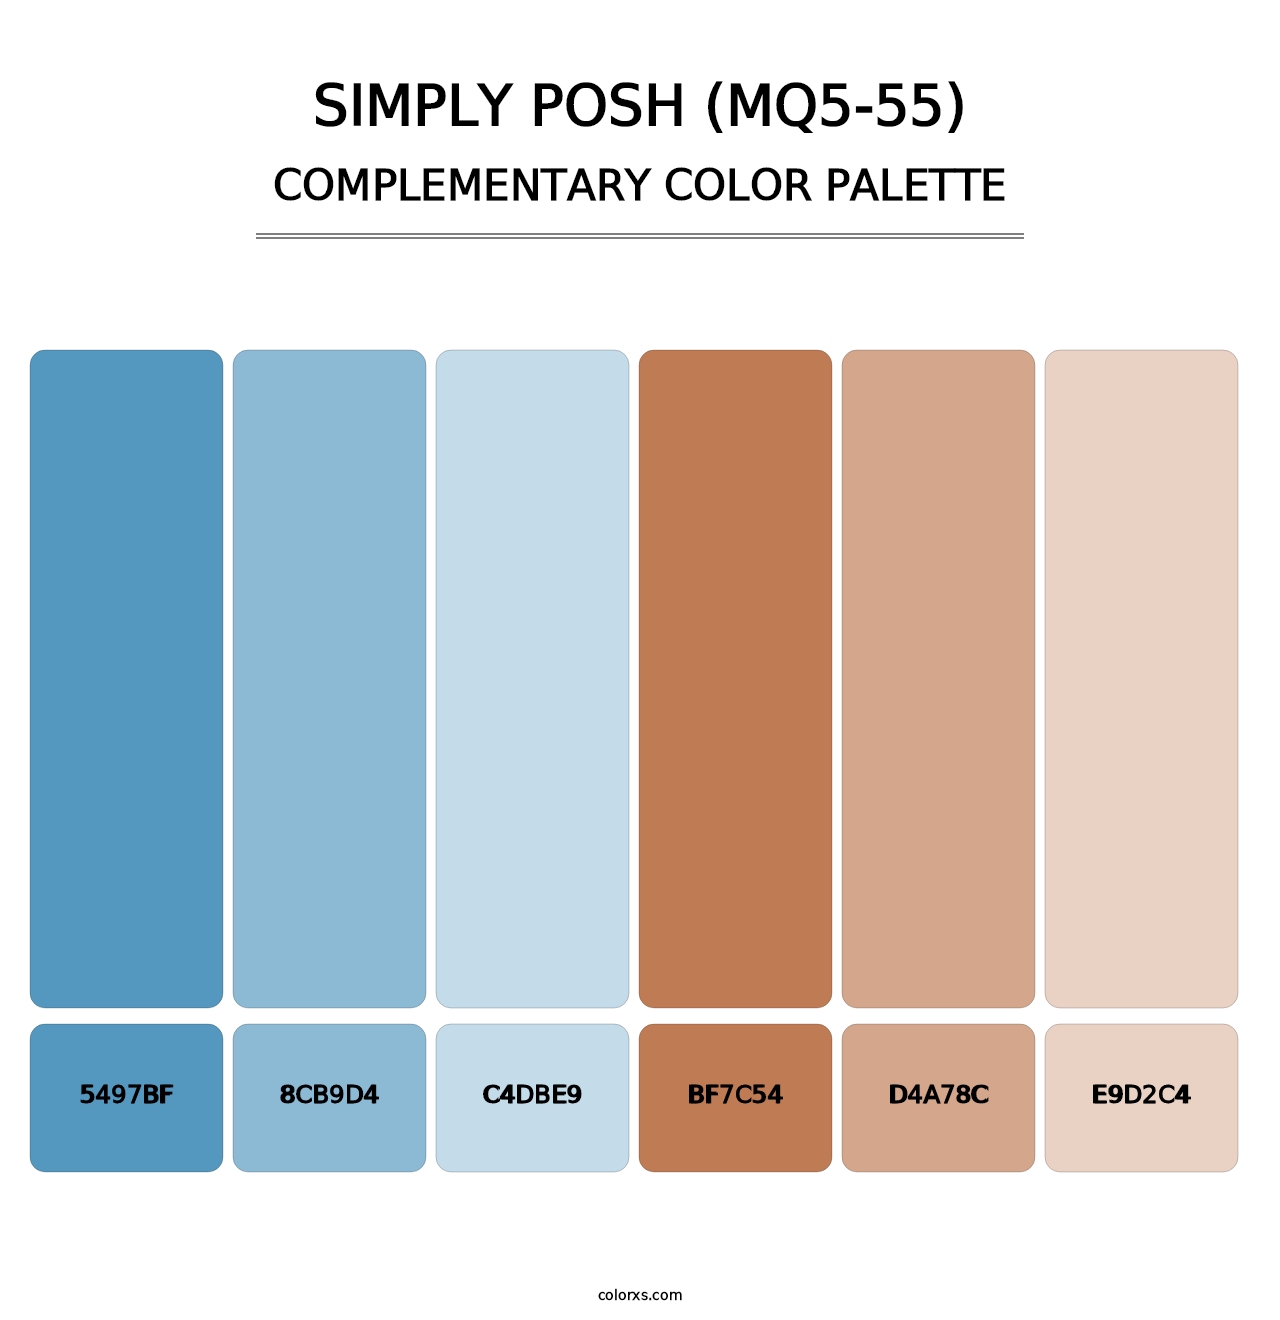 Simply Posh (MQ5-55) - Complementary Color Palette